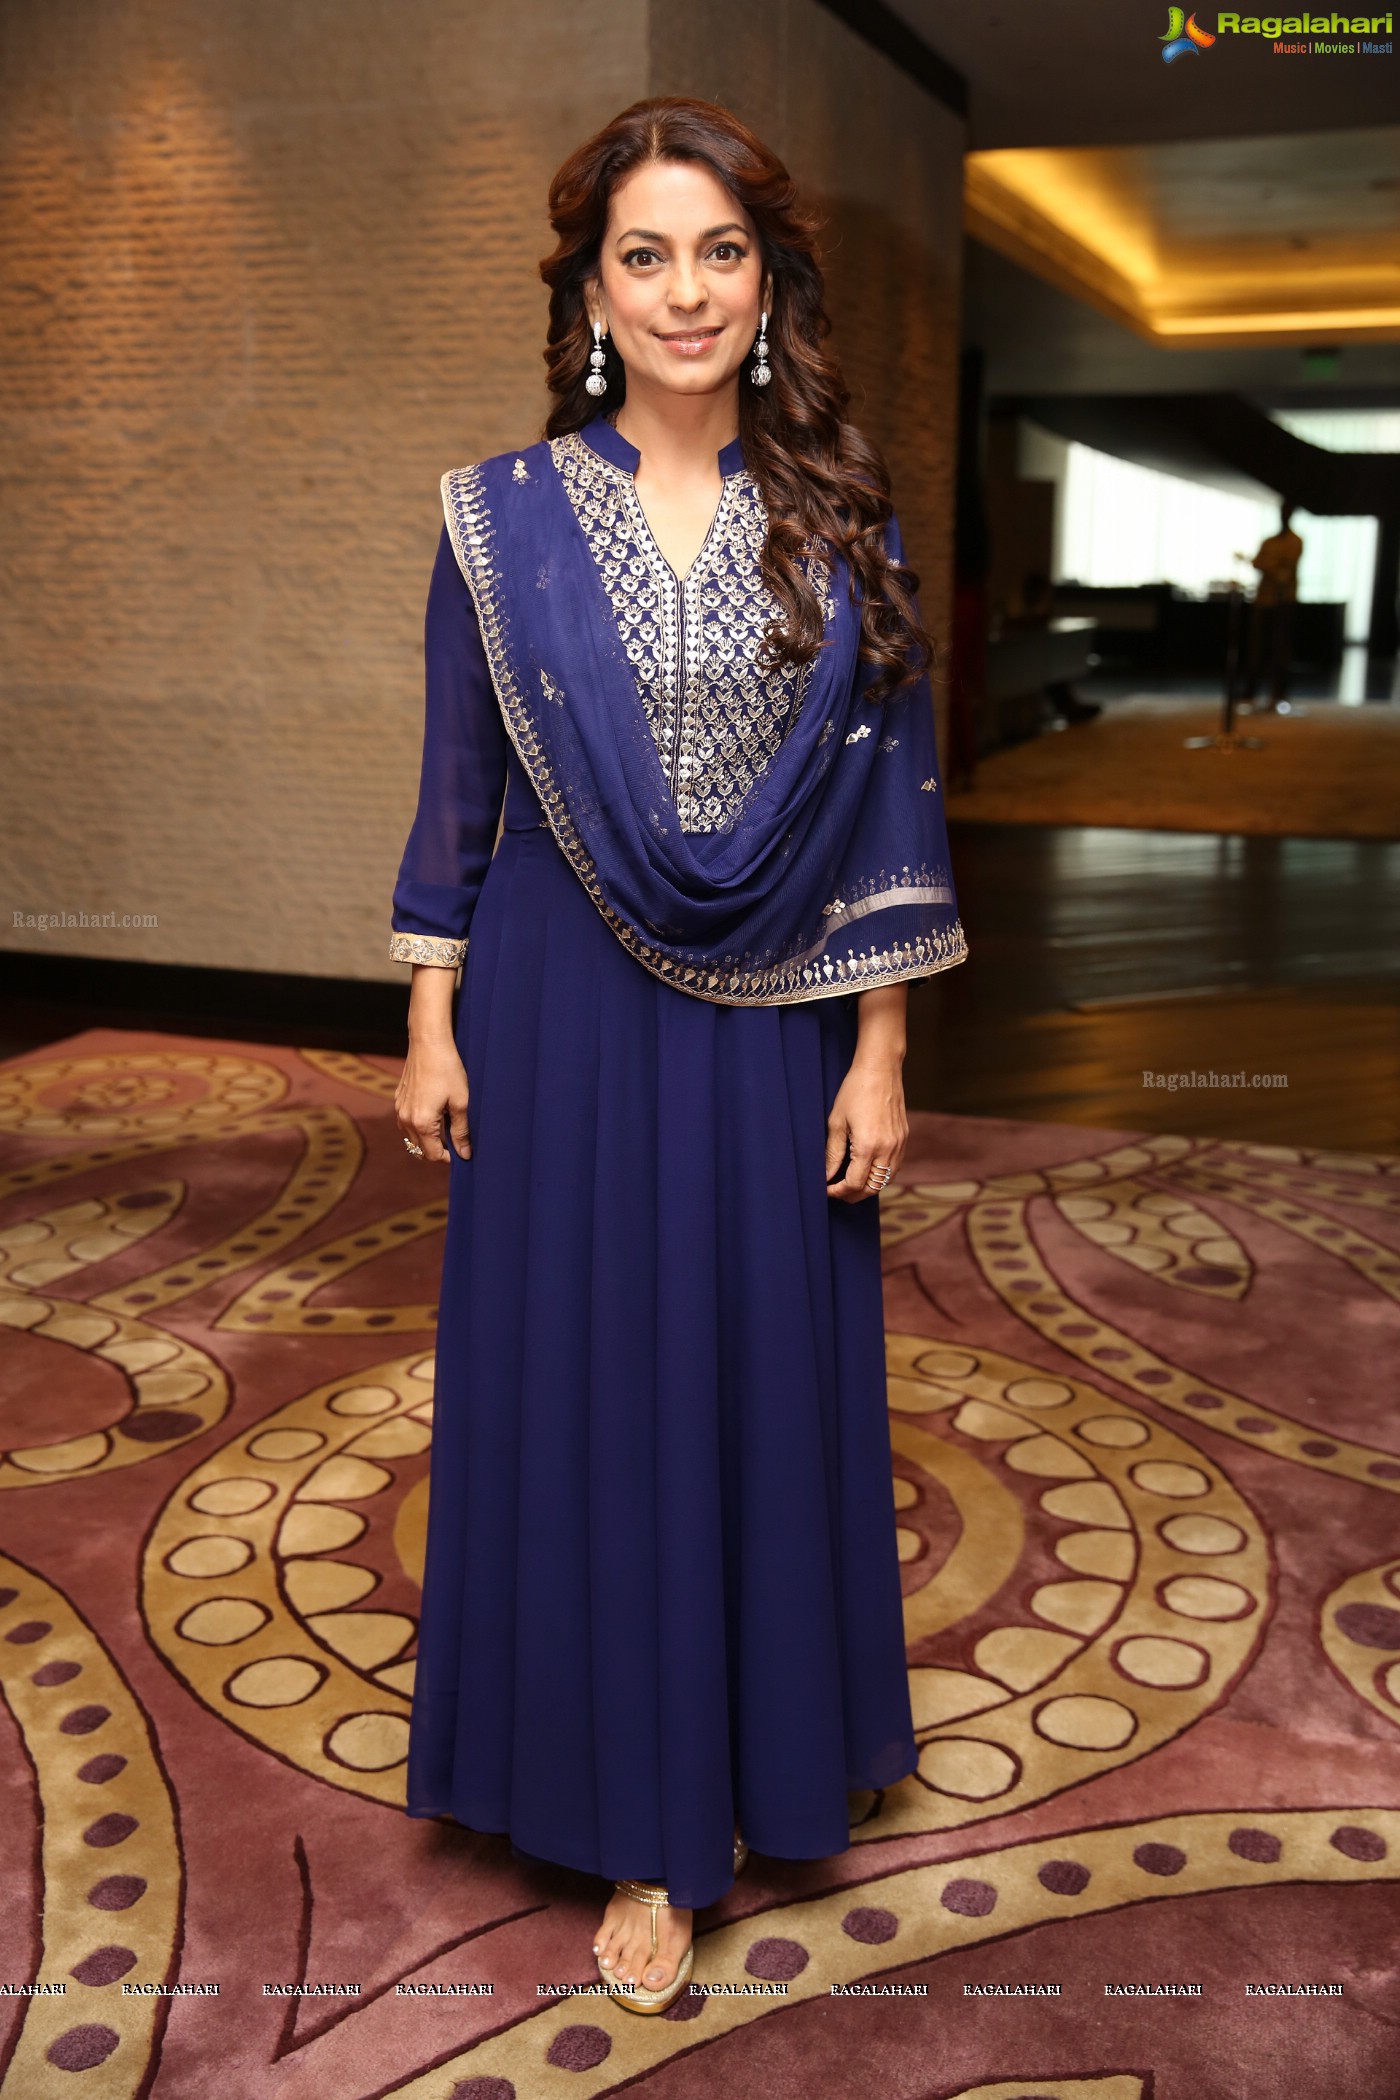 Juhi Chawla at Young FICCI Ladies Organization (YFLO) Event, Hyderabad (Posters)